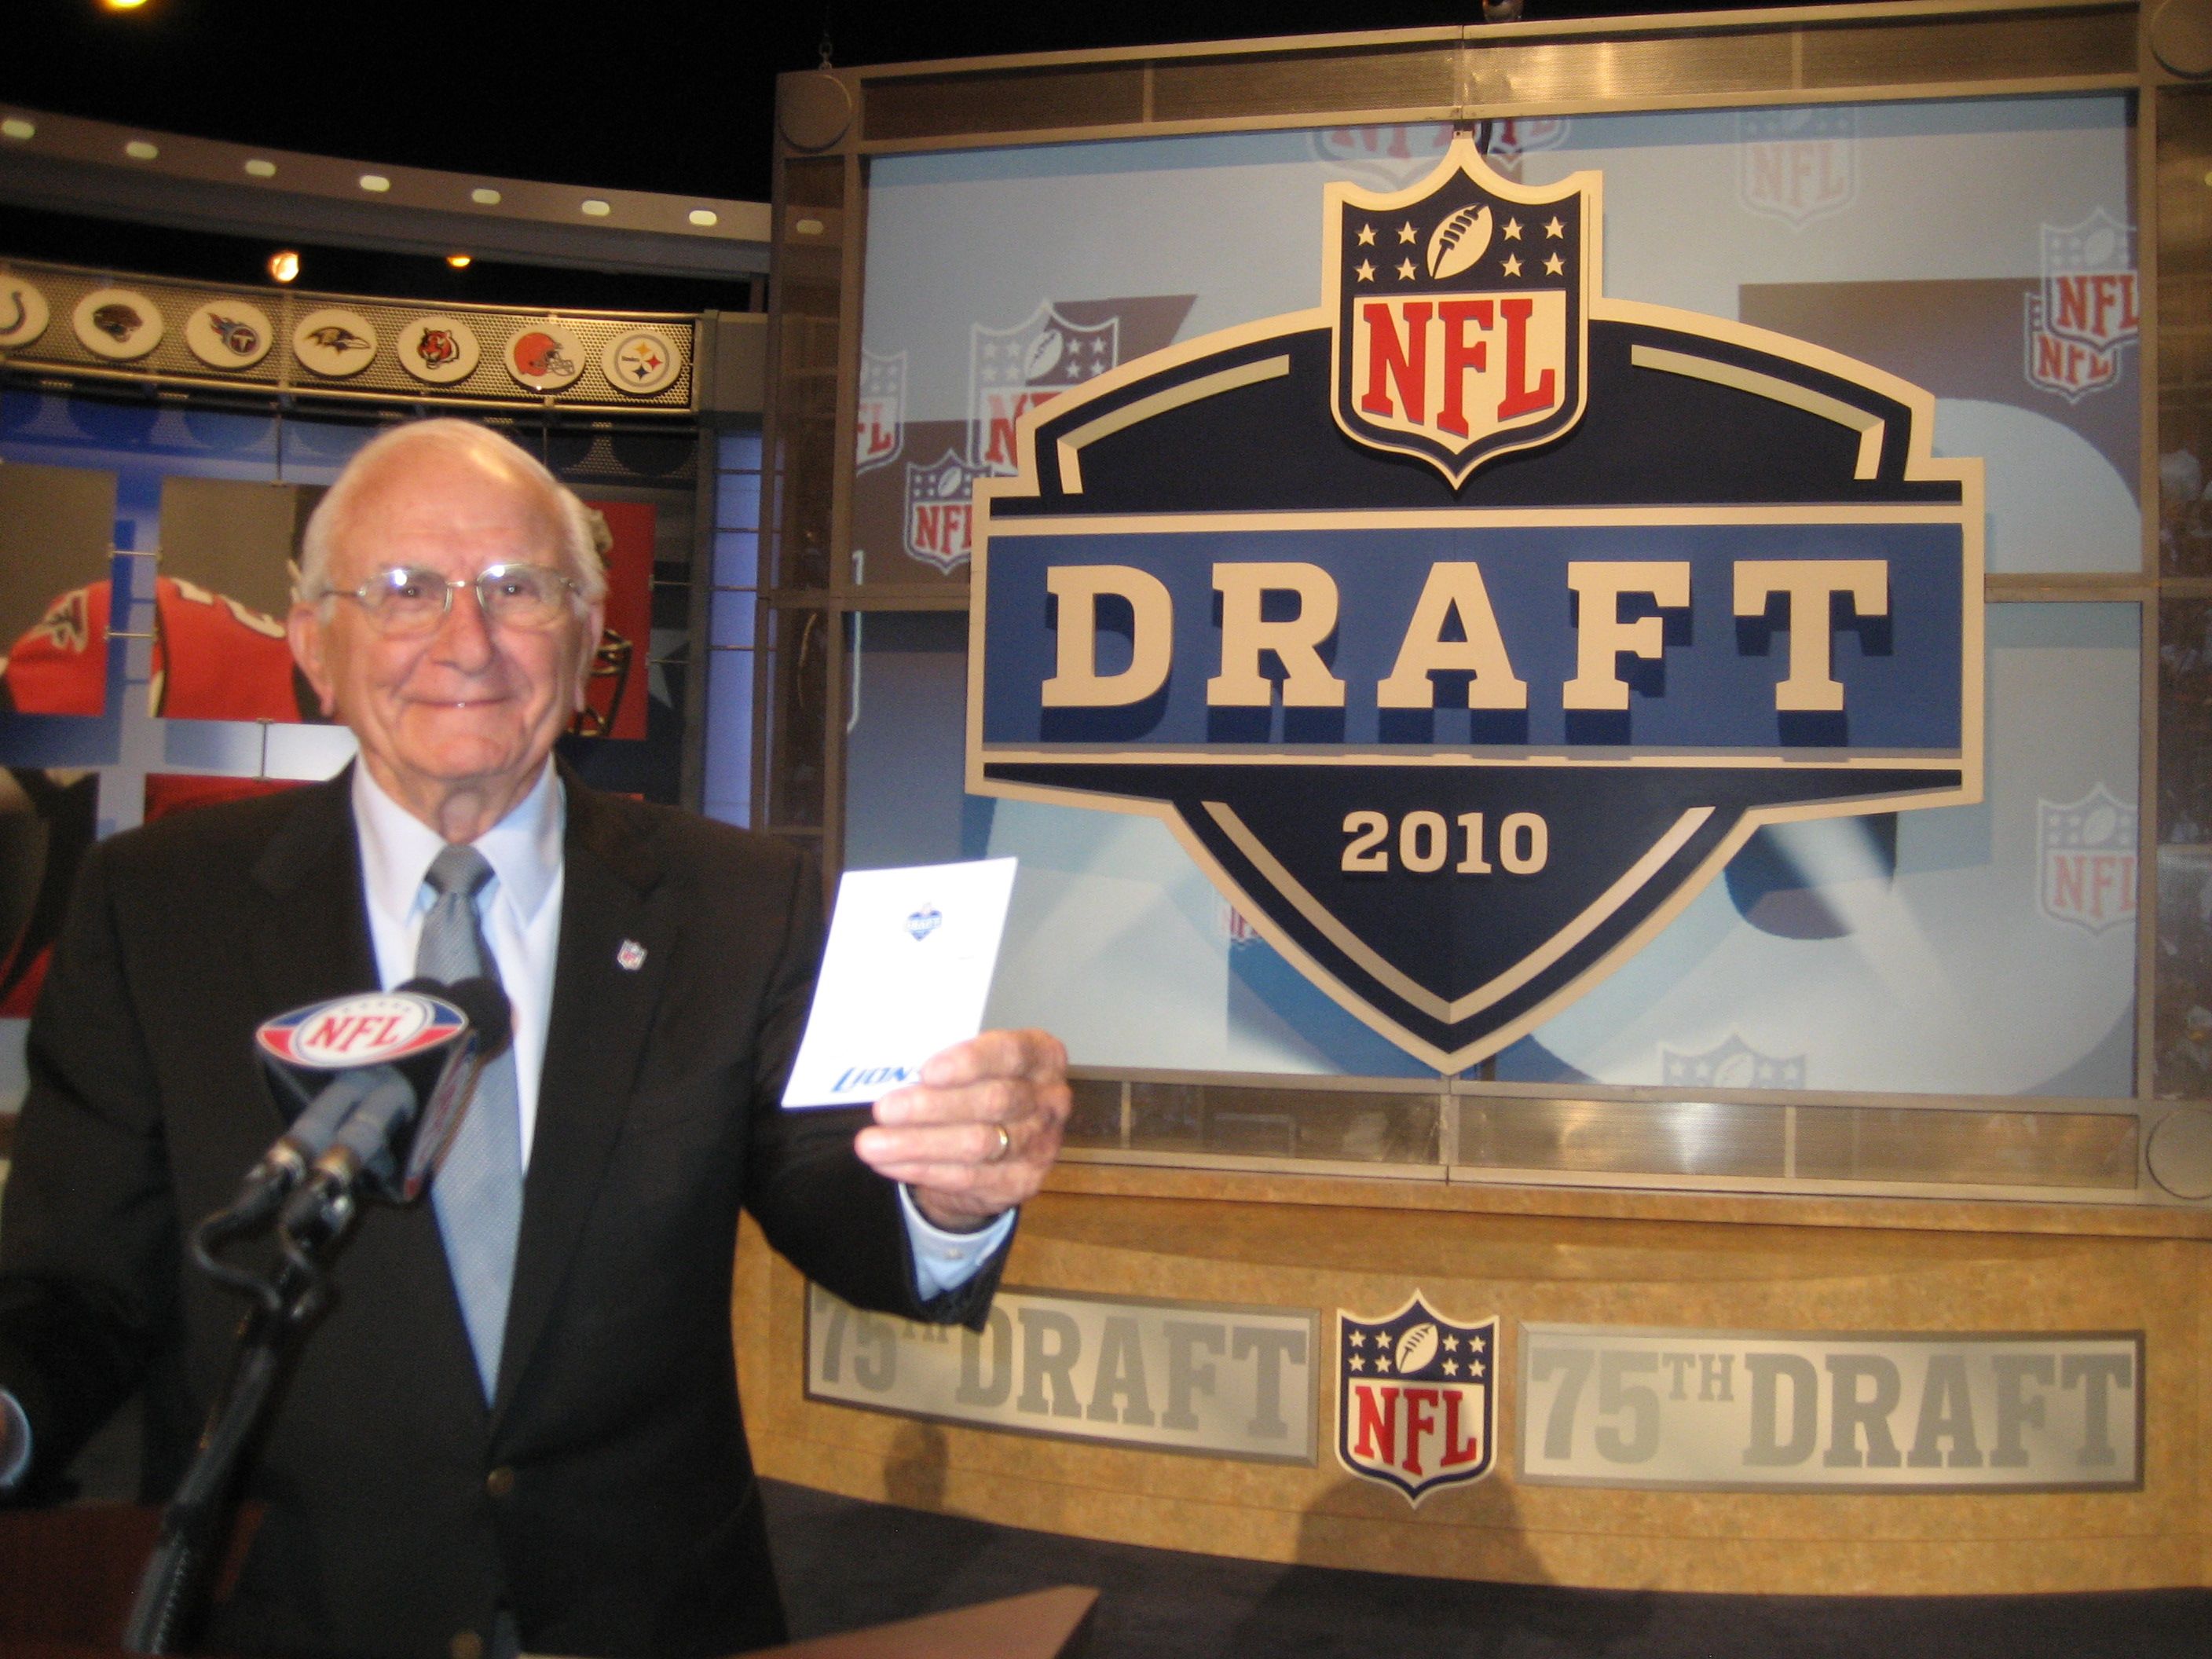 For One Man, the N.F.L. Draft's 'Mr. Irrelevant' Meant a Lot - The